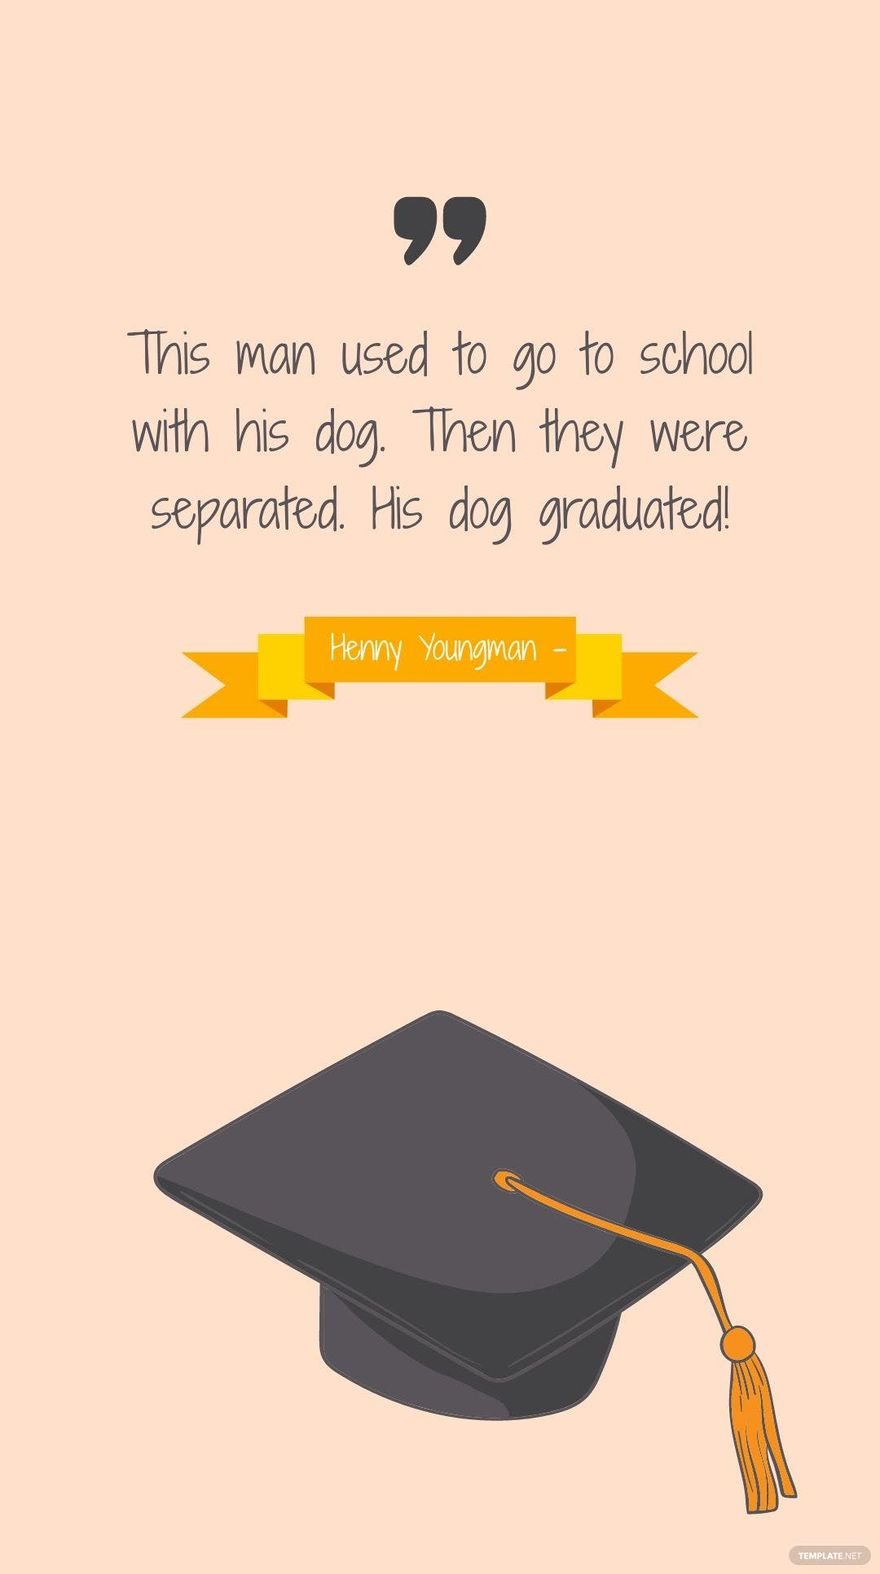 Henny Youngman - This man used to go to school with his dog. Then they were separated. His dog graduated!